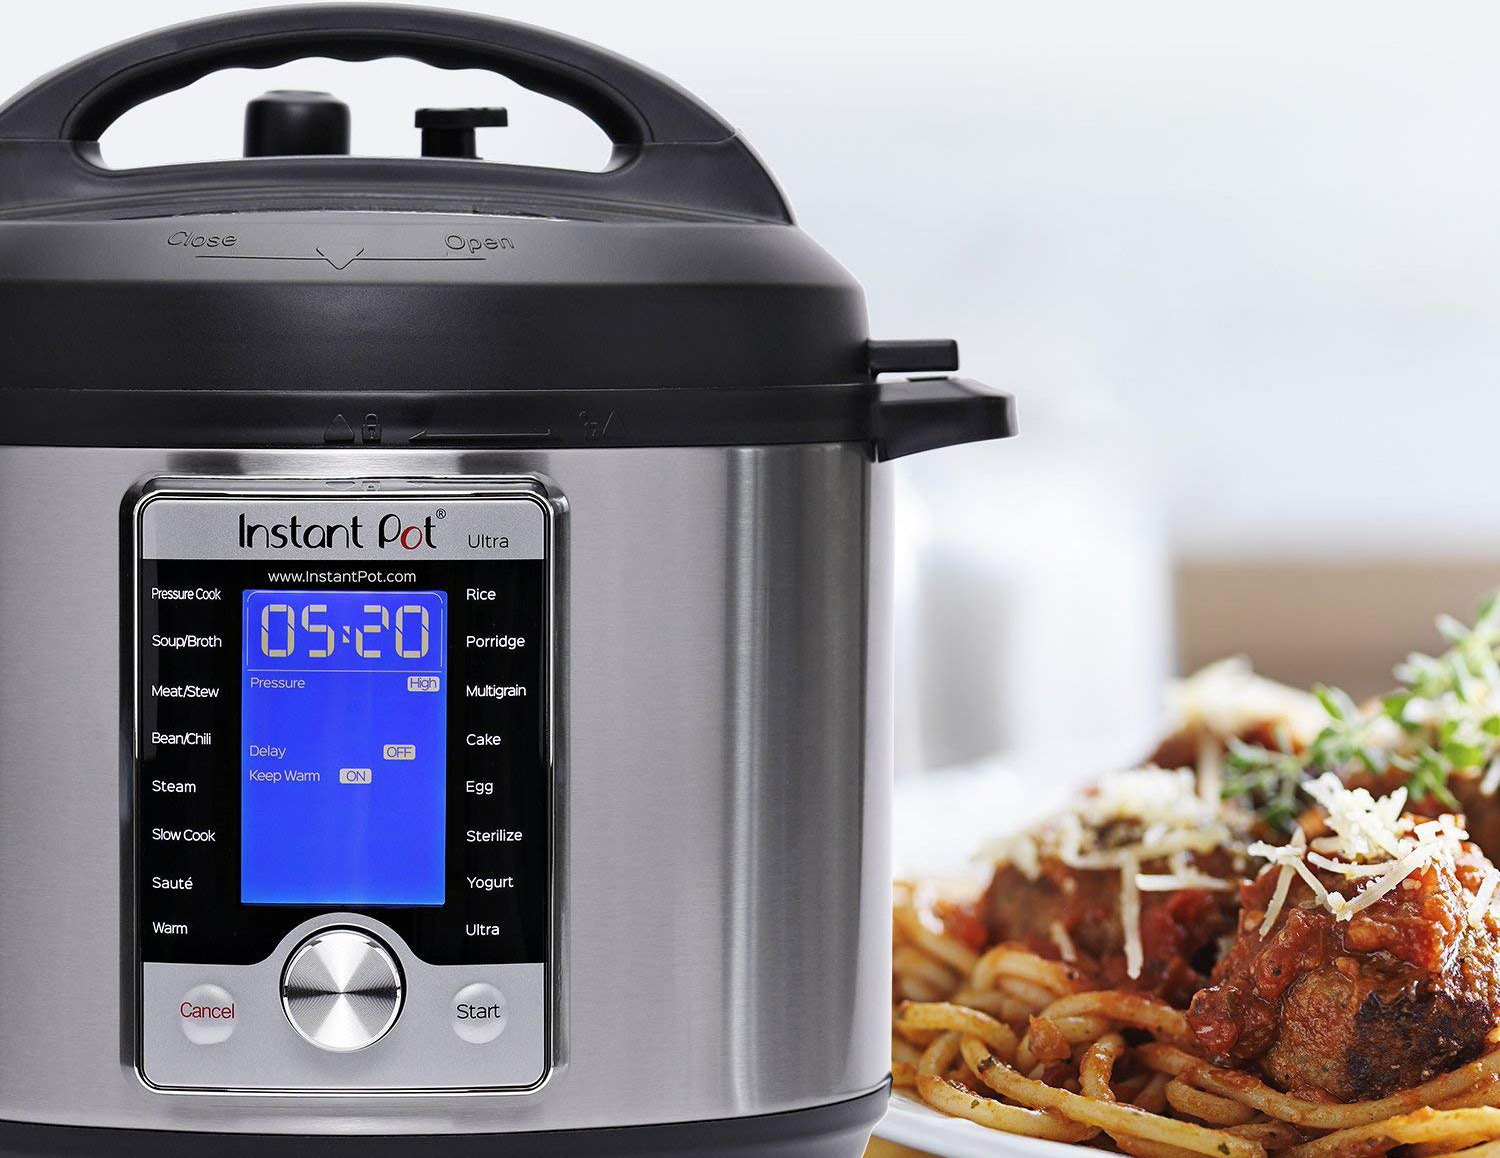 This year’s Prime Day Instant Pot deals are better than anything we’ve